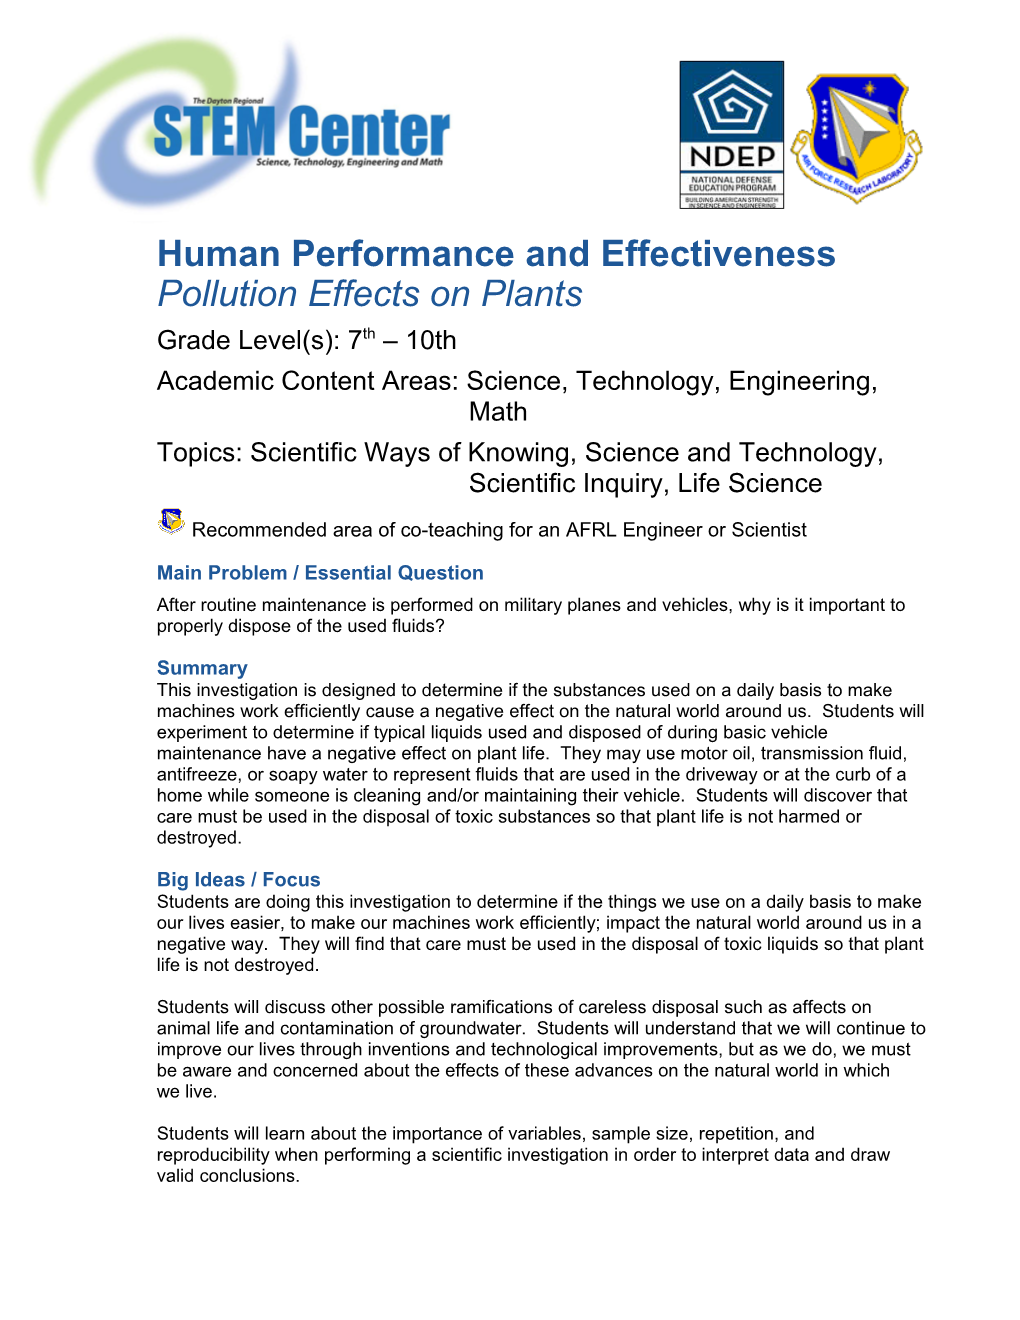 Human Performance and Effectiveness